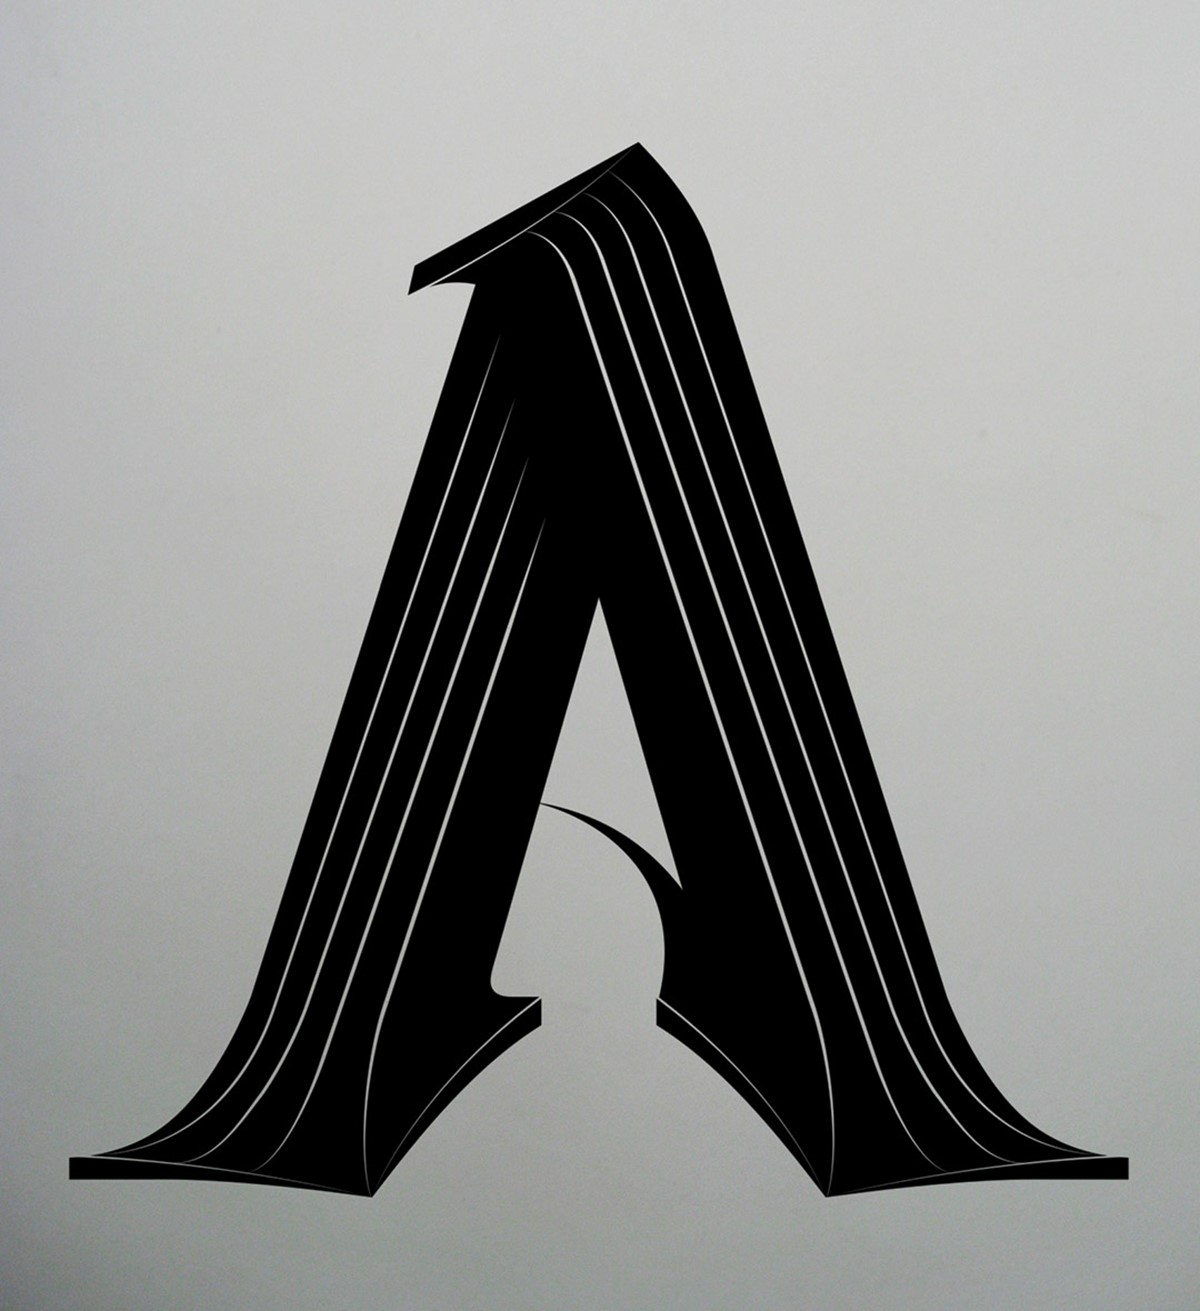 AIGA. Type Tuesday. BLT LTR Series. Typographic experiment: letter A. Design by Superfried.